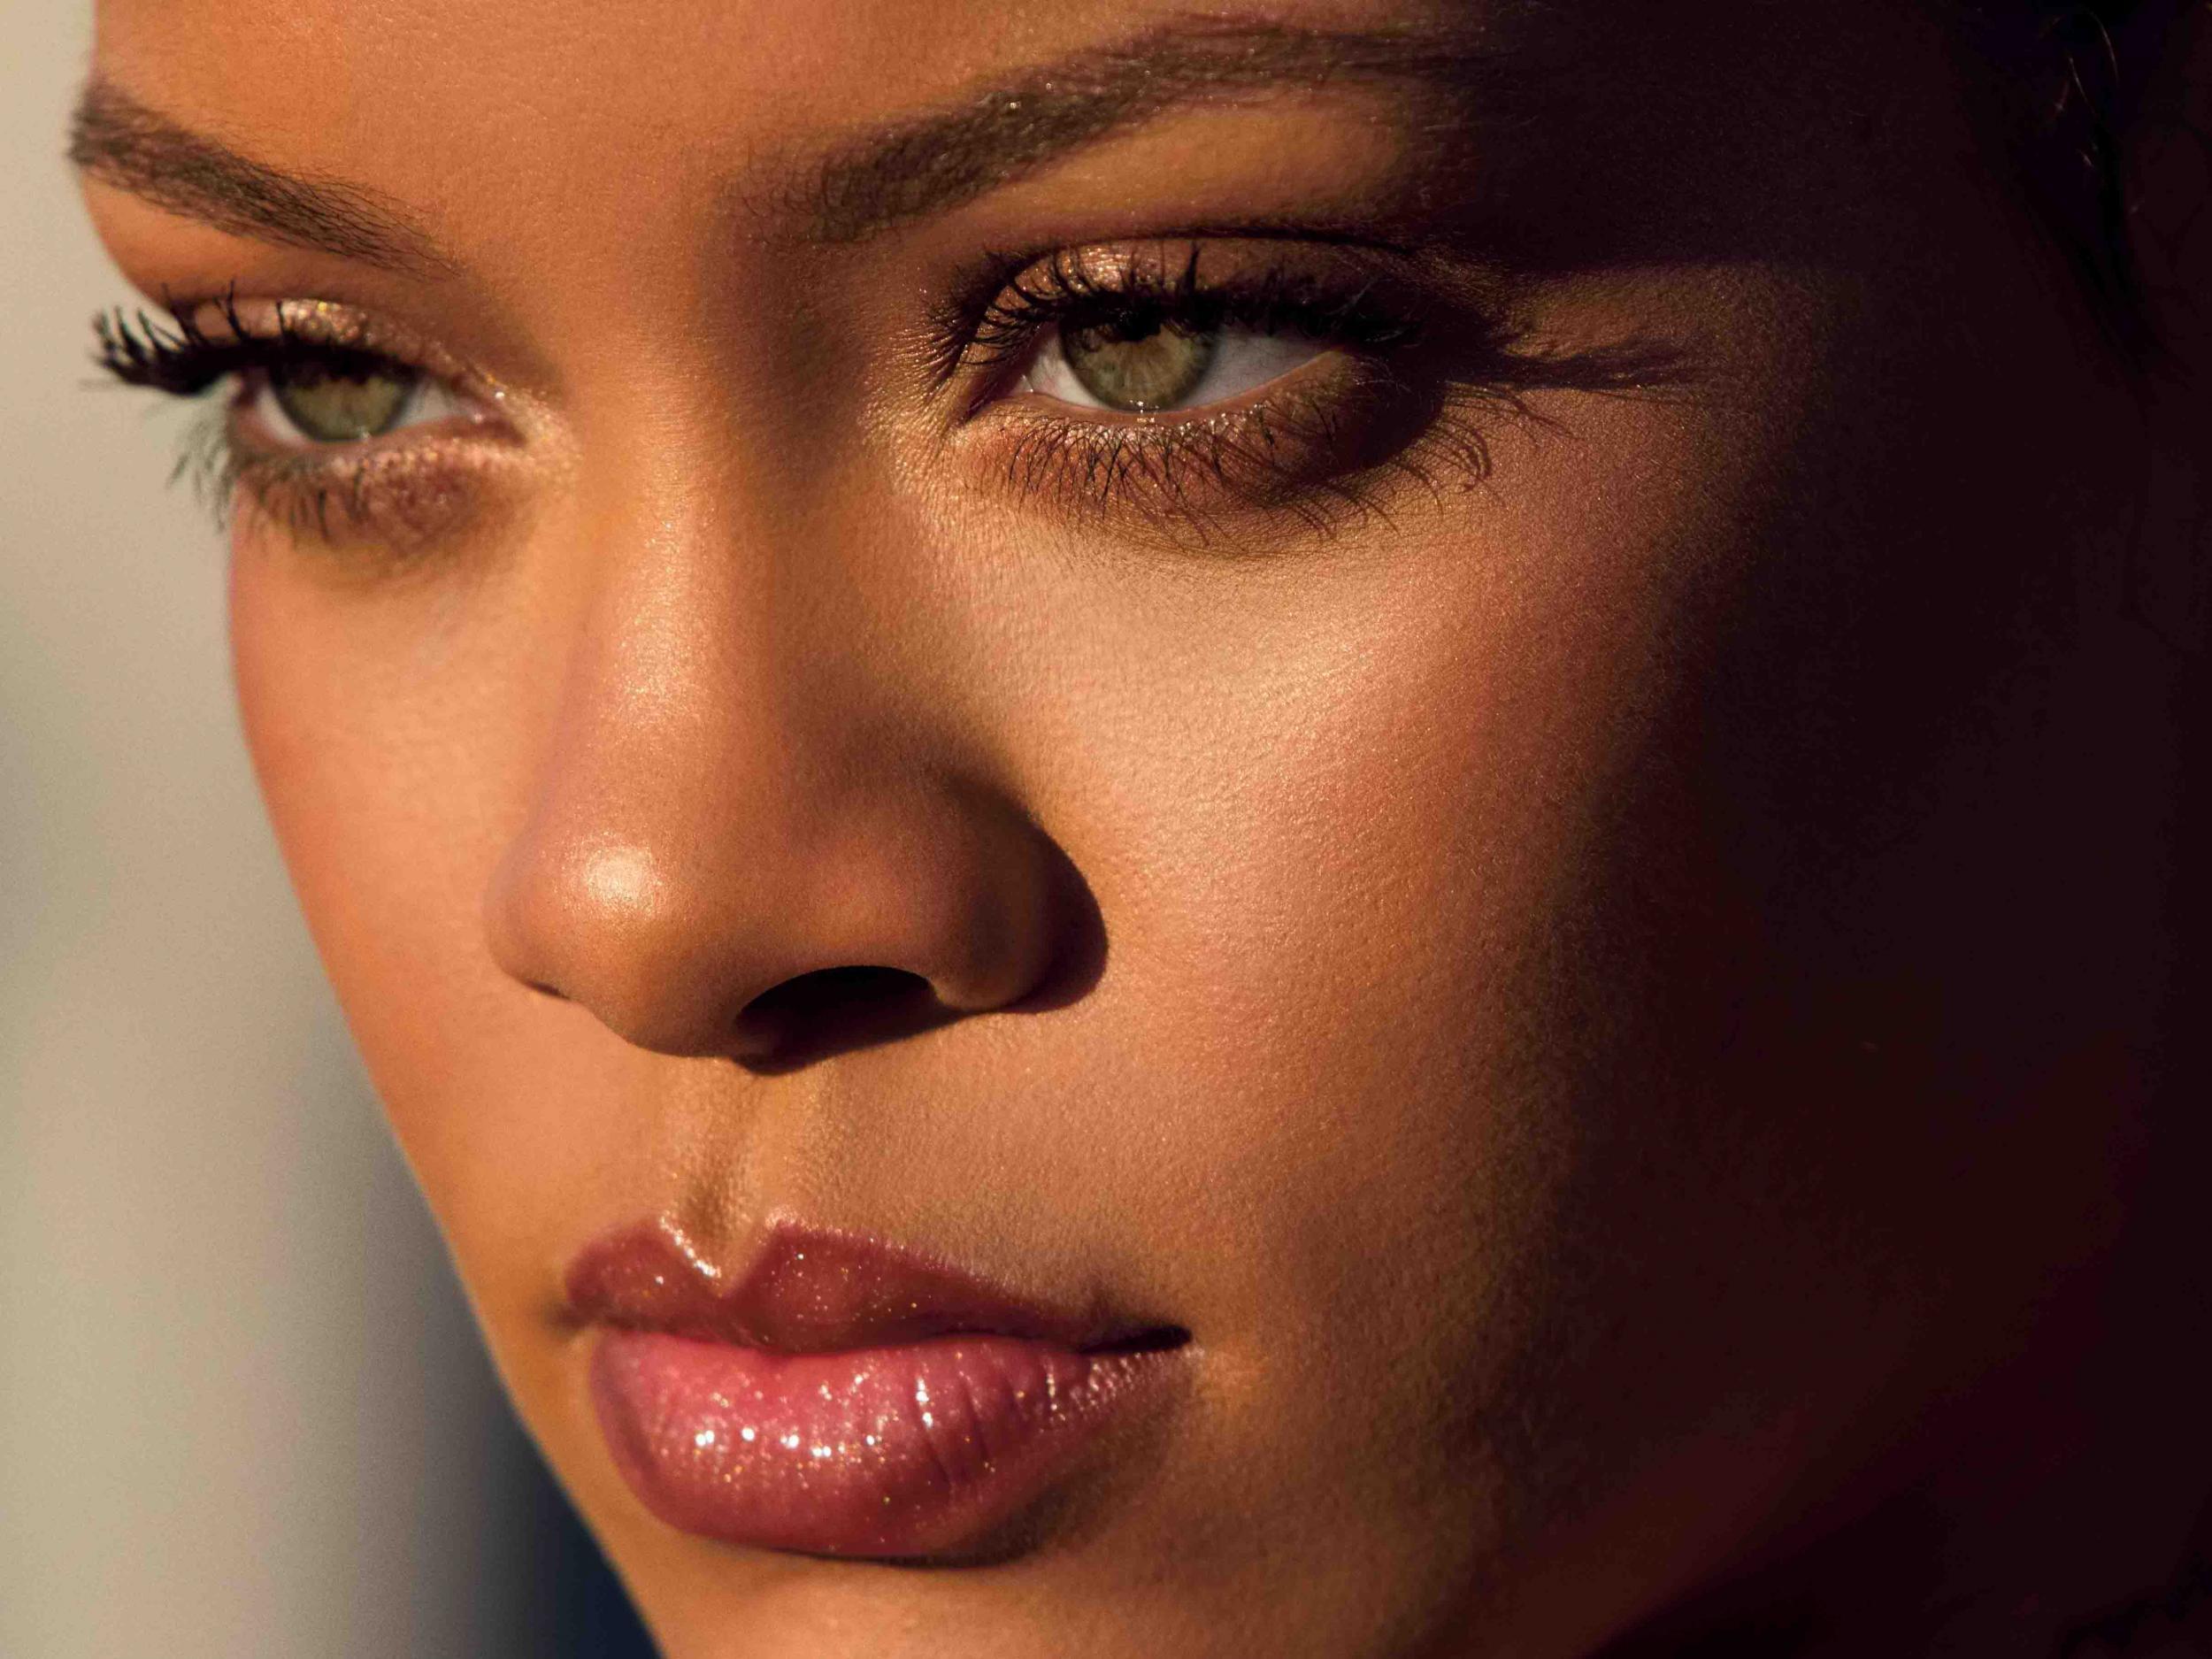 What to Buy From Rihanna's Fenty Beauty Makeup Line